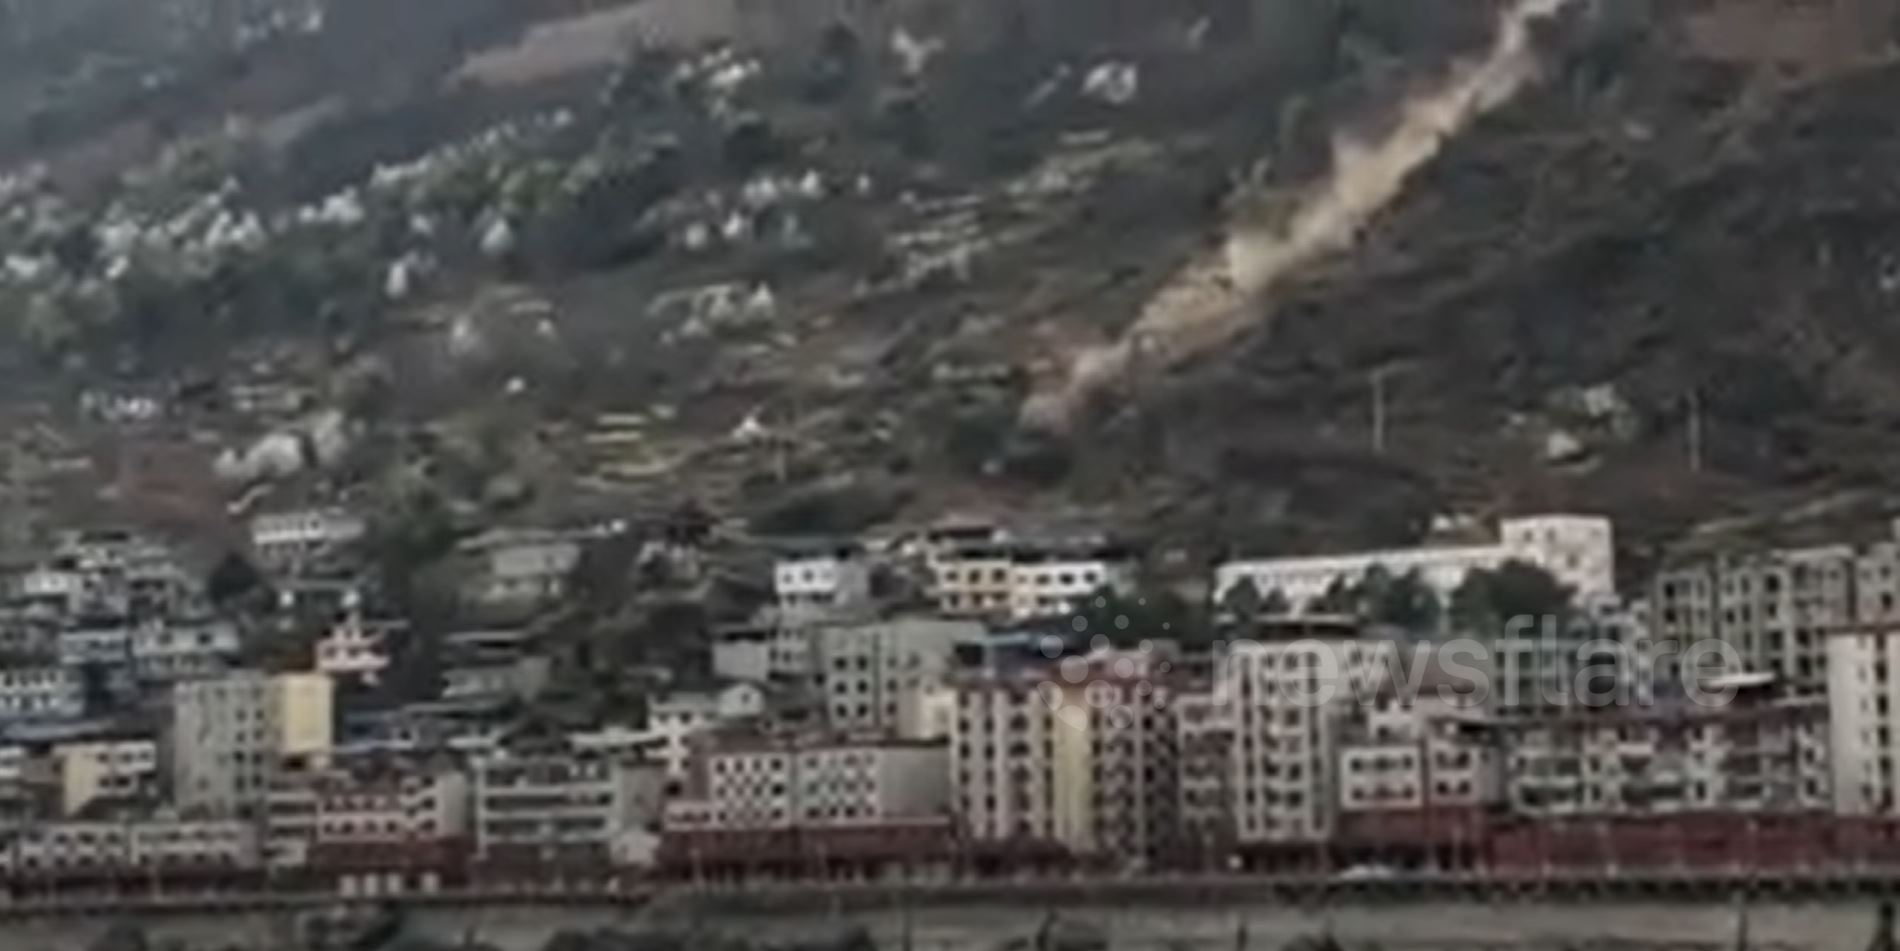 The 27 February 2021 landslide in Ebian Yi Autonomous County in China. S